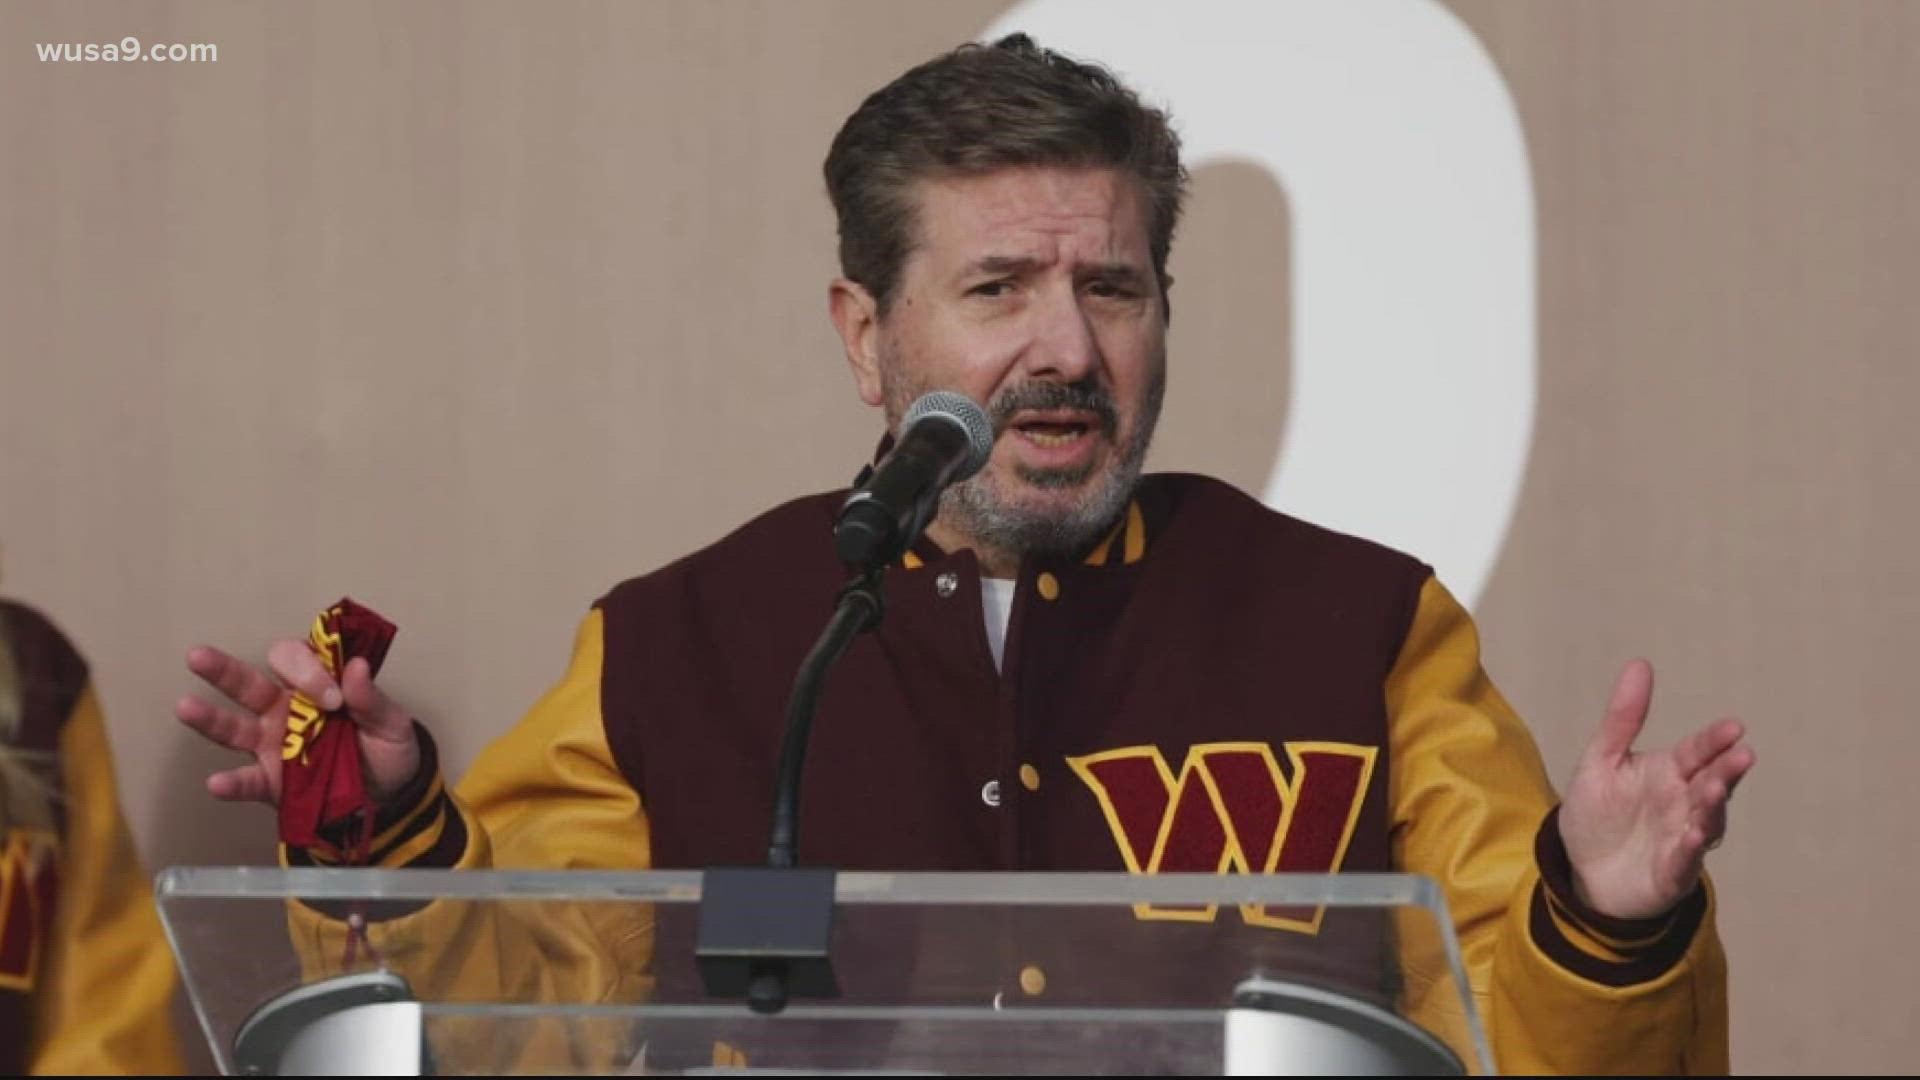 We're hearing reports the owners have enough votes to oust Washington Commanders owner Dan Snyder.